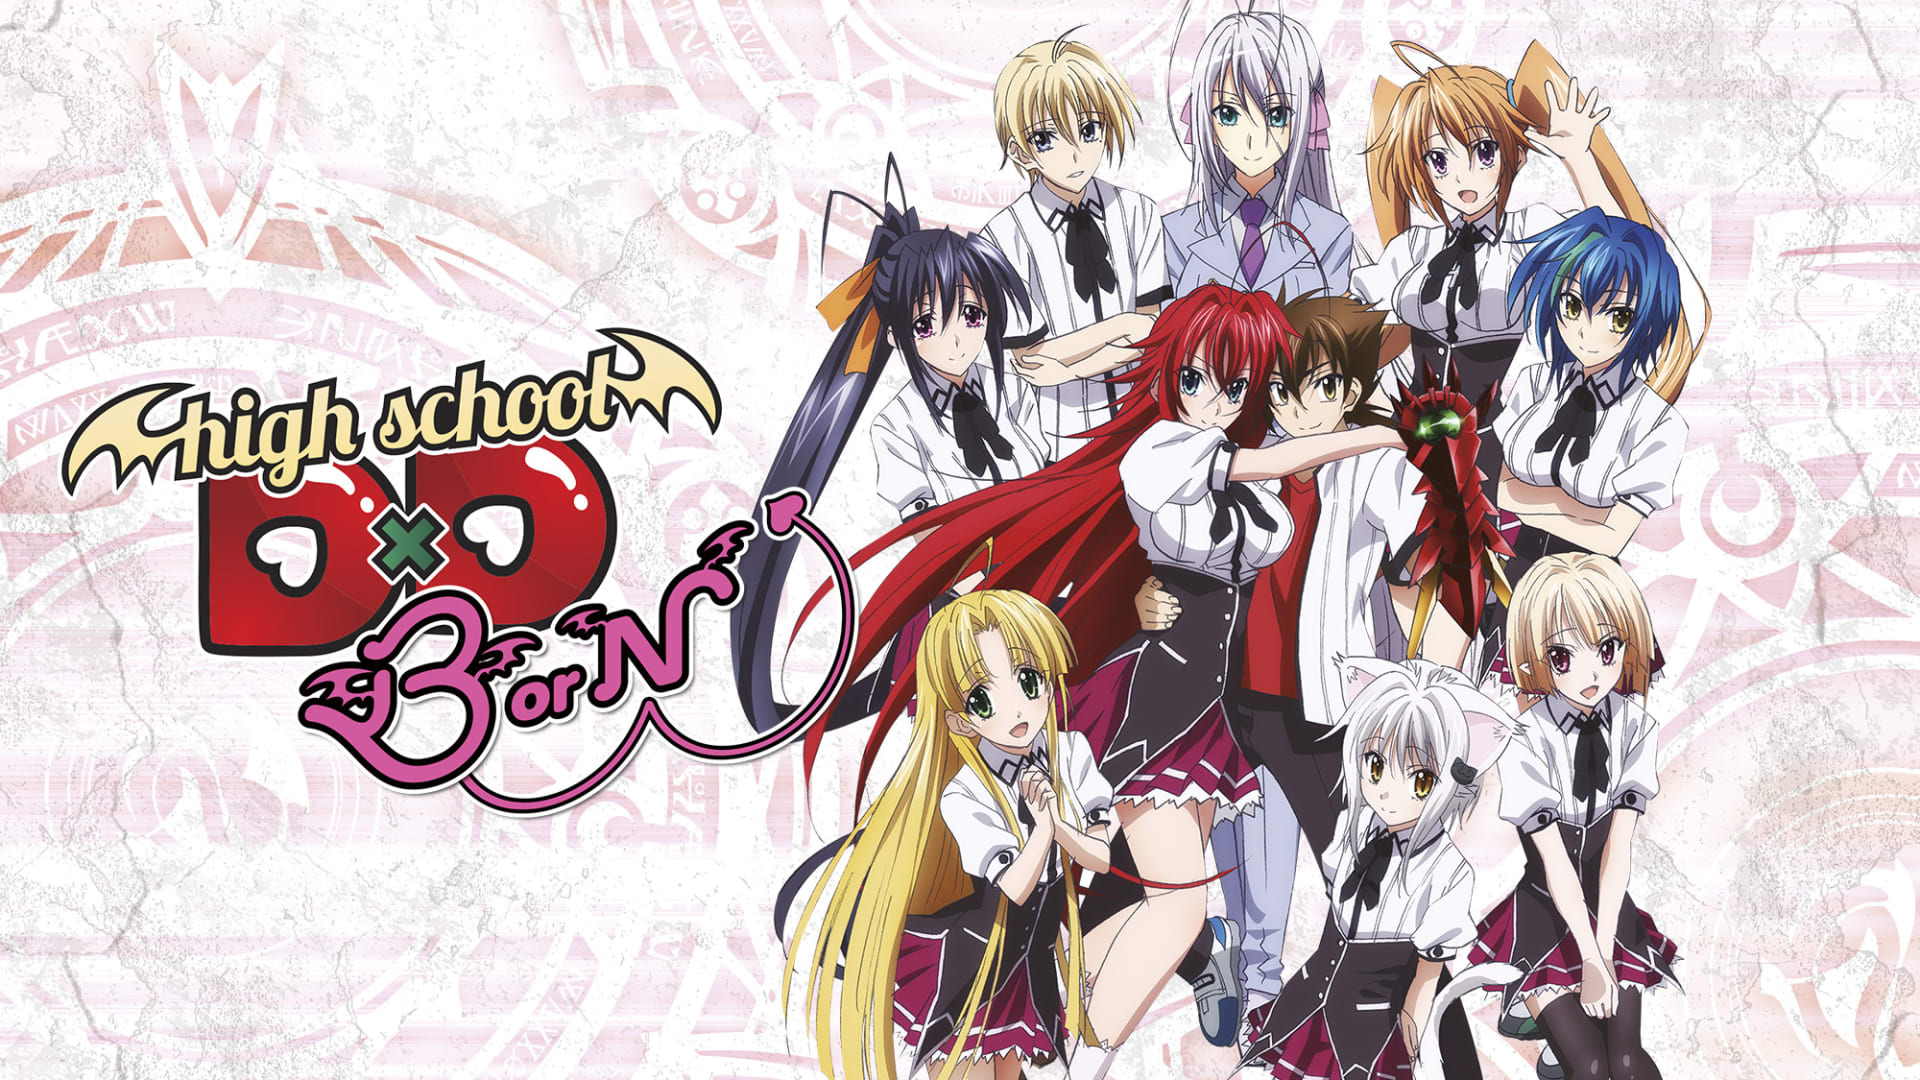 christy abe recommends Highschool Dxd Season 3 Ep 1